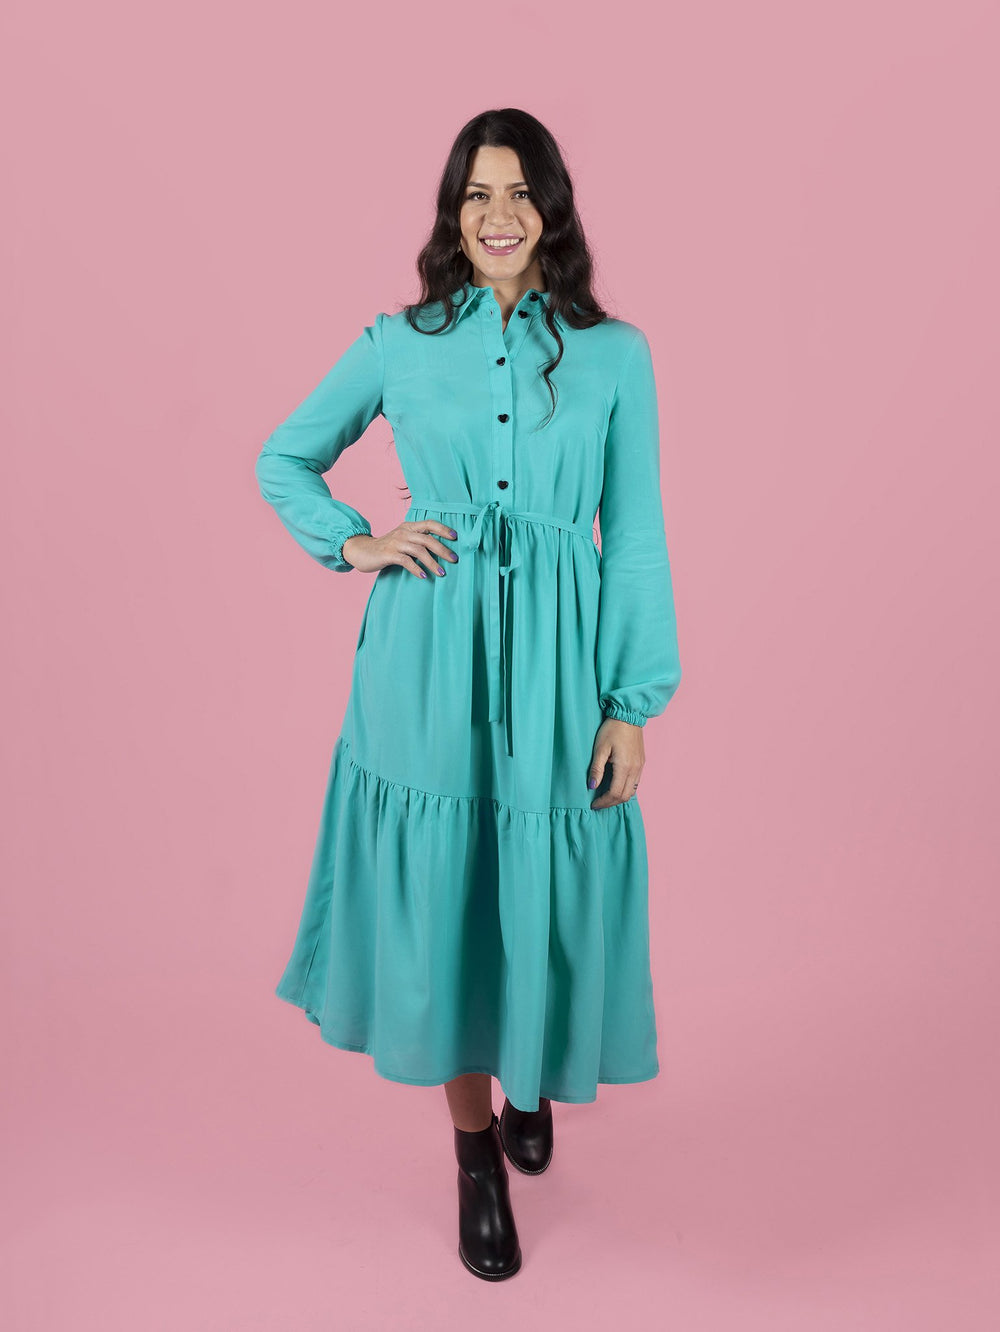 Tilly & The Buttons LYRA Shirt Dress Pattern from Jaycotts Sewing Supplies